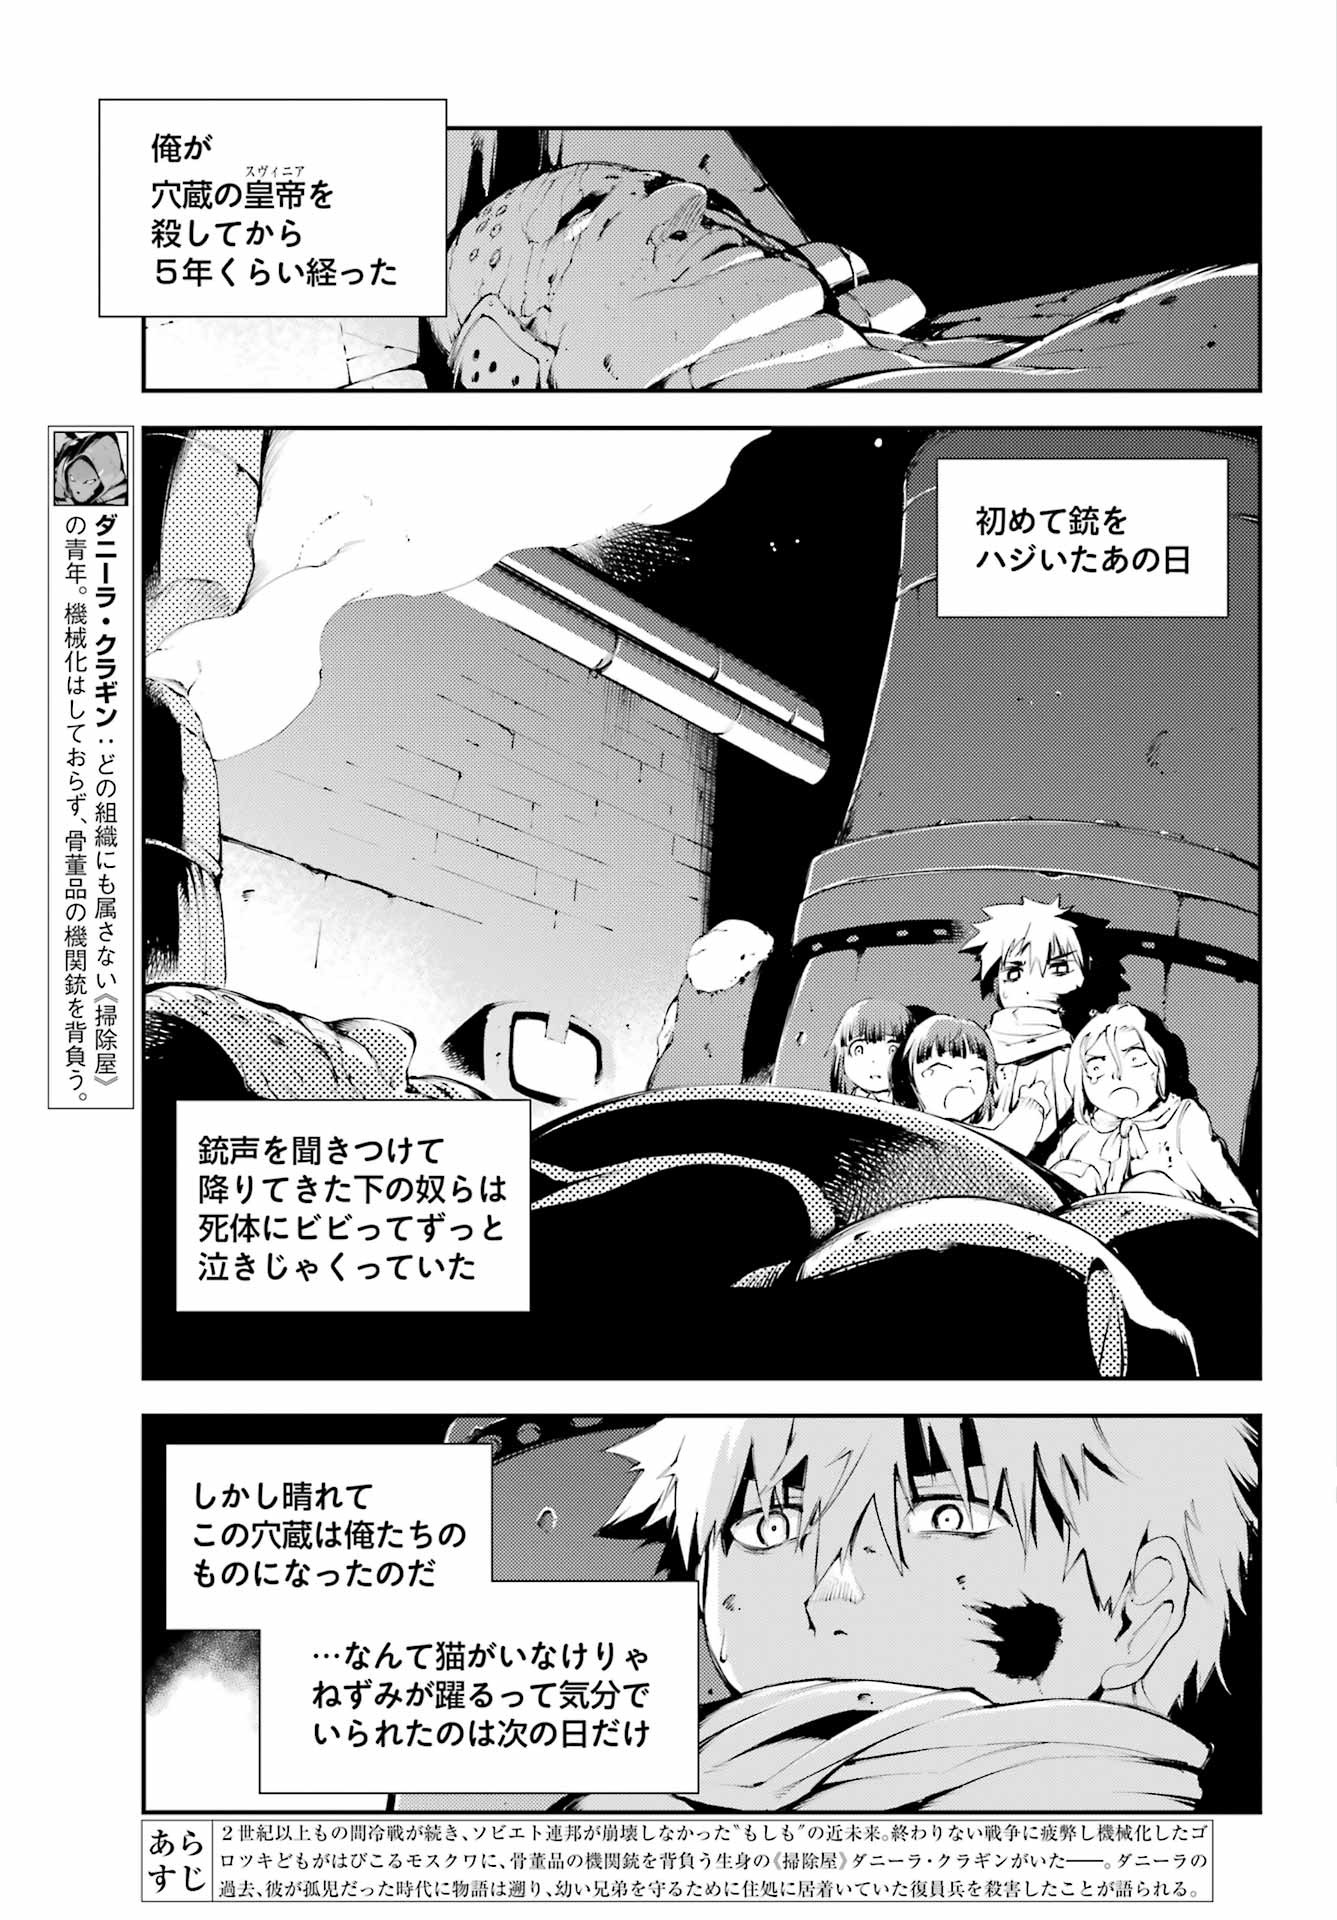 Moscow 2160 - Chapter 08 - Page 3